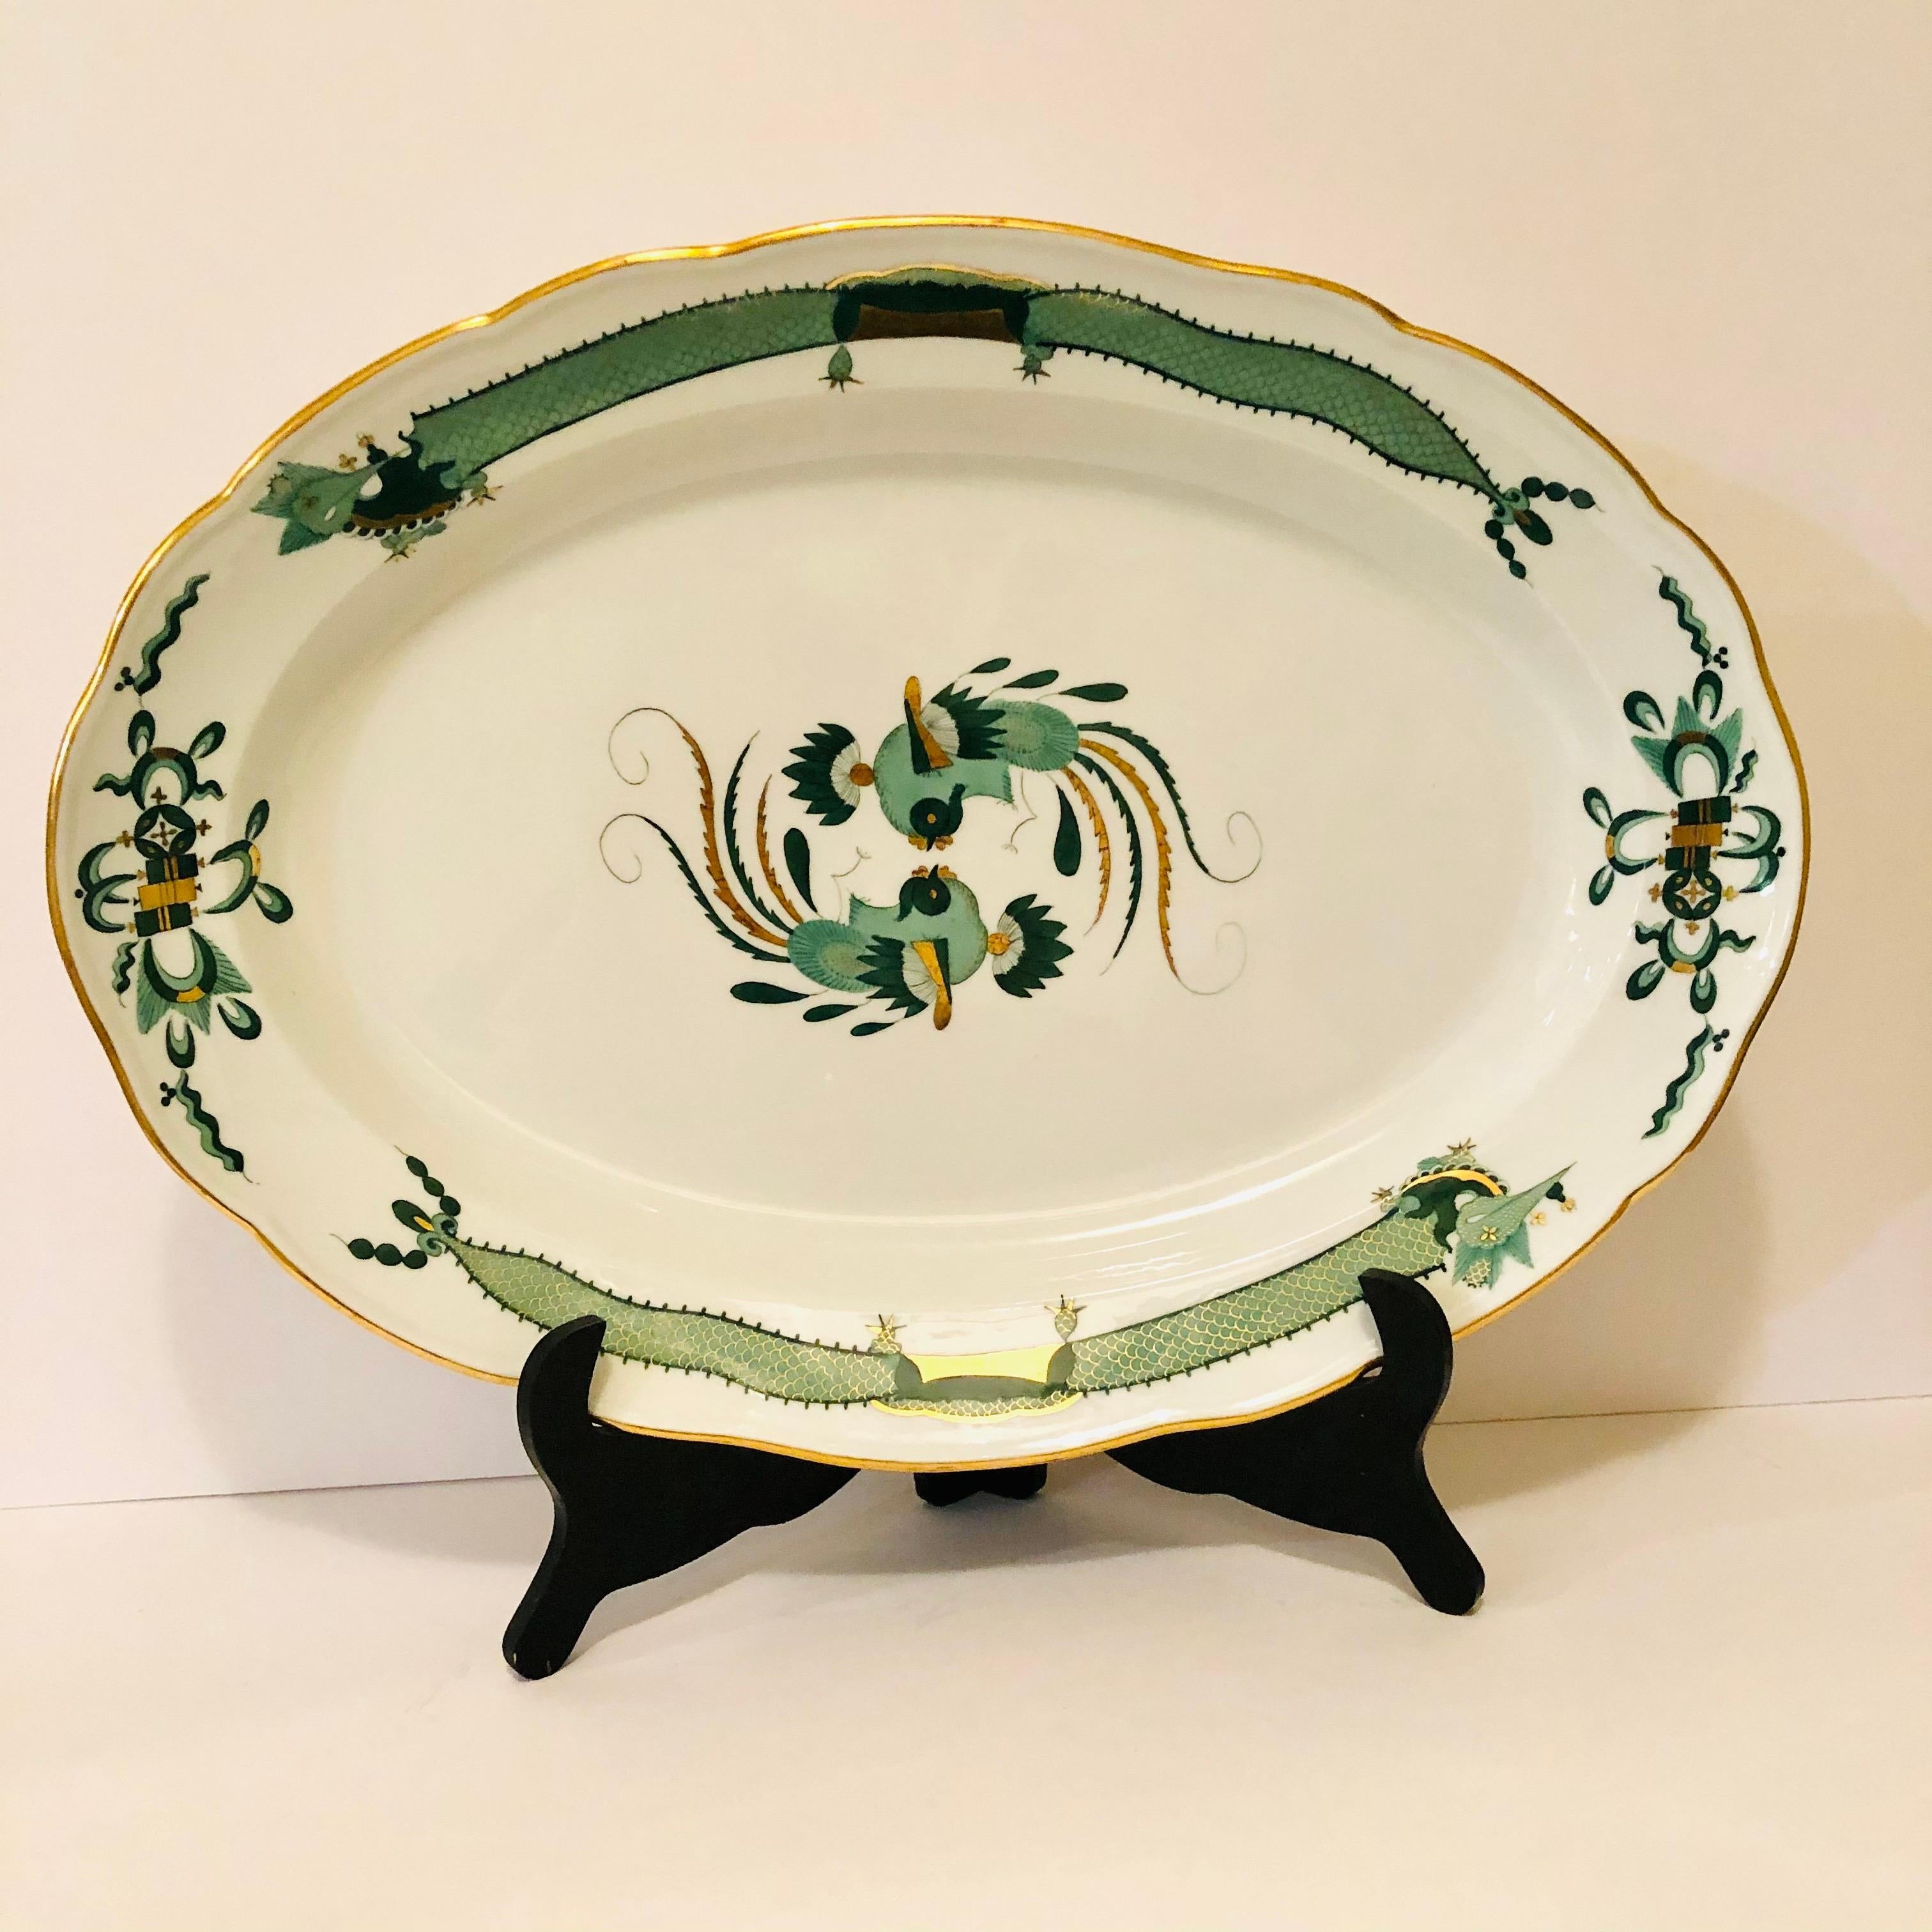 I want to offer you this beautiful Meissen green court dragon large platter dating back to the 1880s. The platter is 19 inches wide and 13.5 inches tall. You can see the detailed paintings of the dragons and the phoenix birds and the rich gold